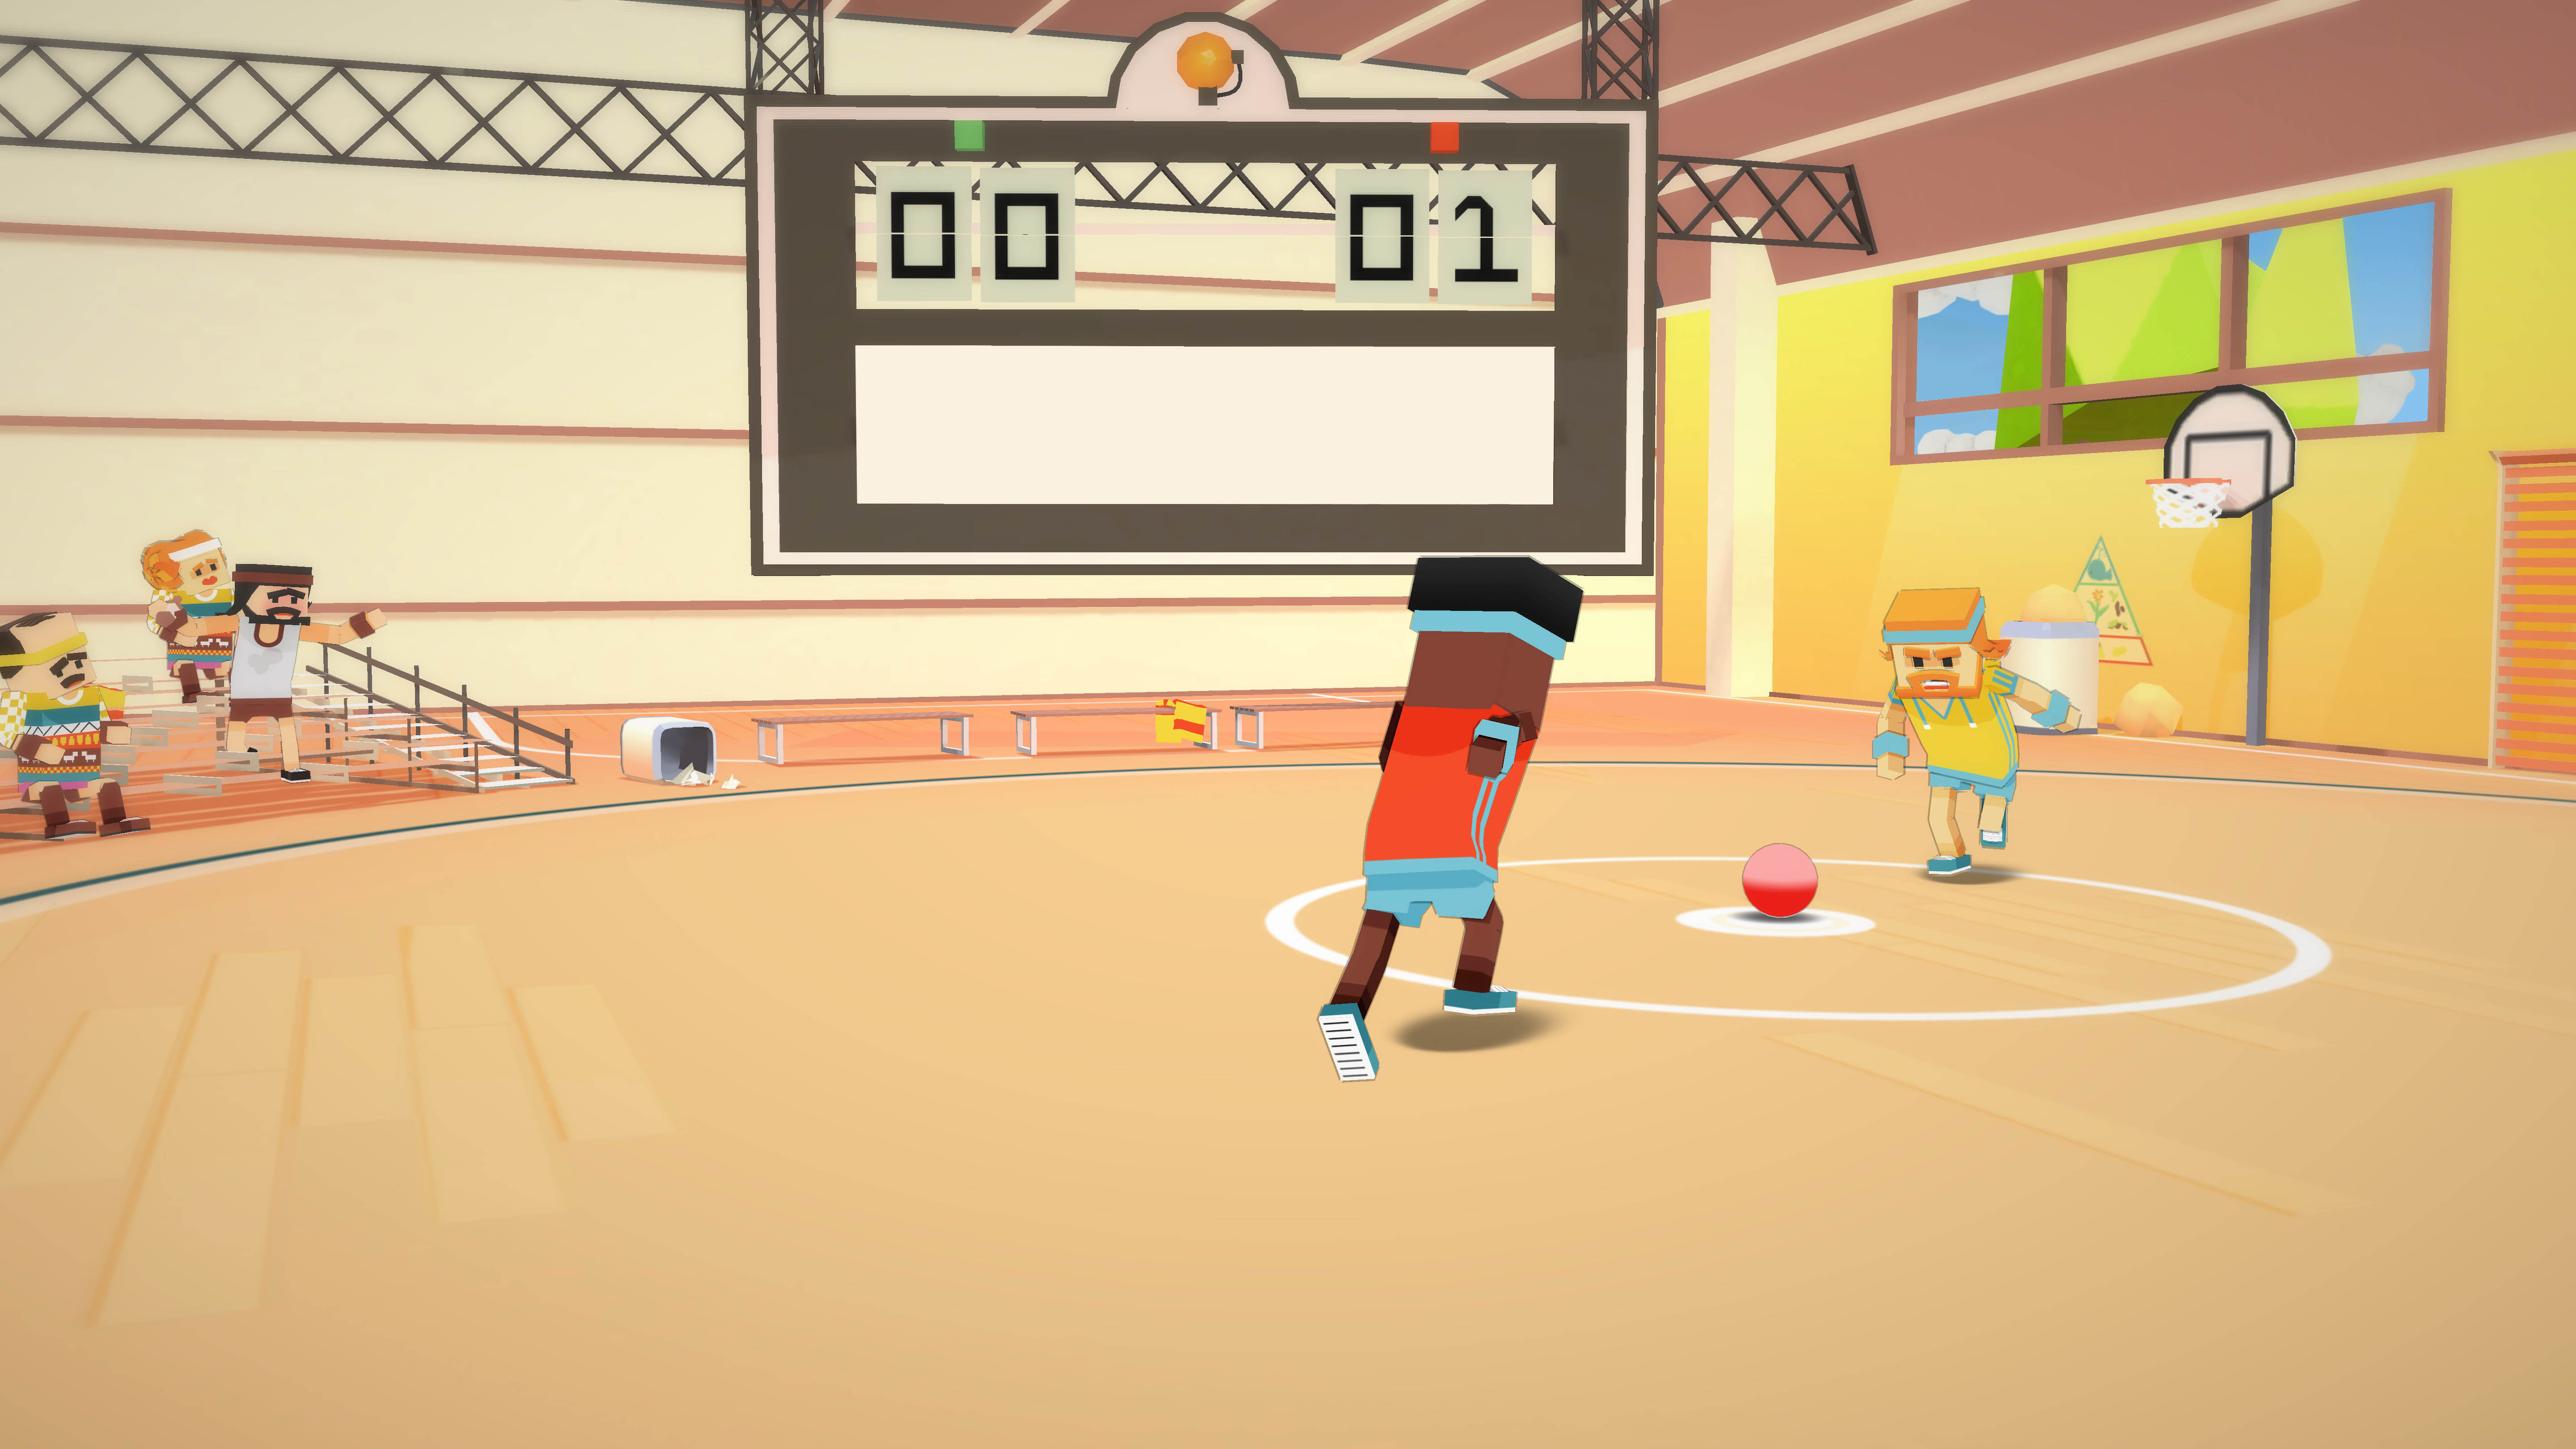 Assimilate Afstem Rusland Stikbold! A Dodgeball Adventure review: Hit me with your best shot –  XBLAFans